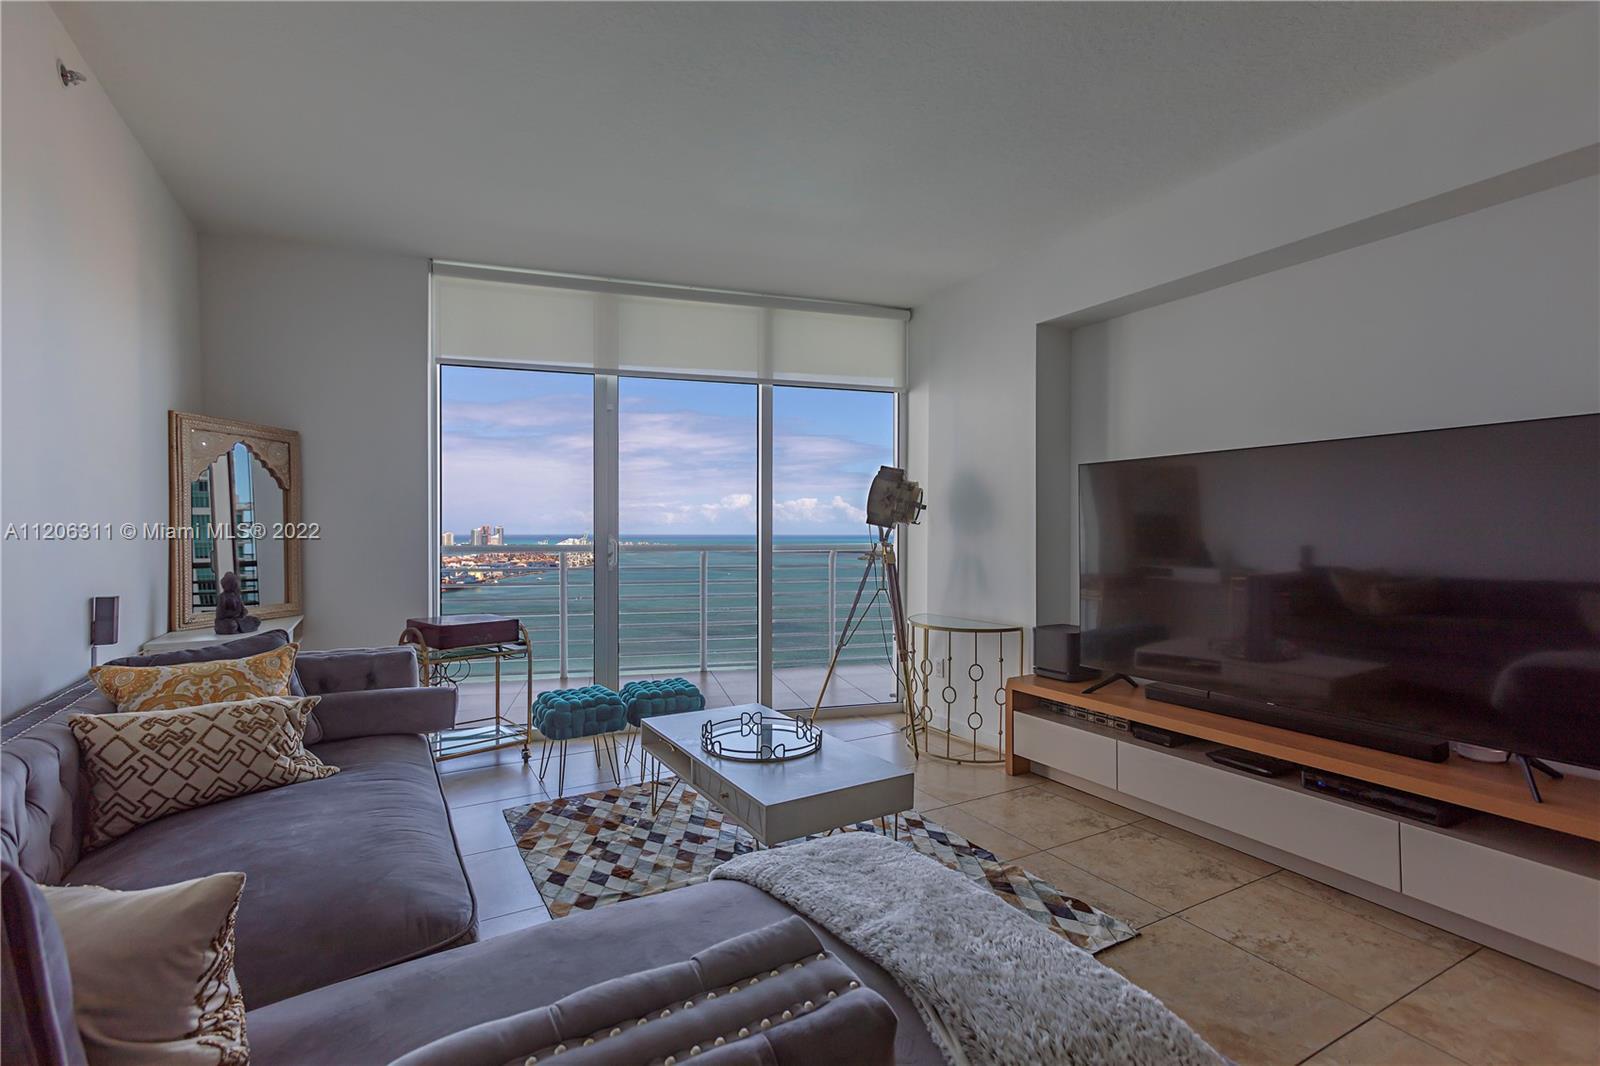 This amazing 3/2 corner unit offer the most spectacular unobstructed views of Biscayne Bay, Port of 